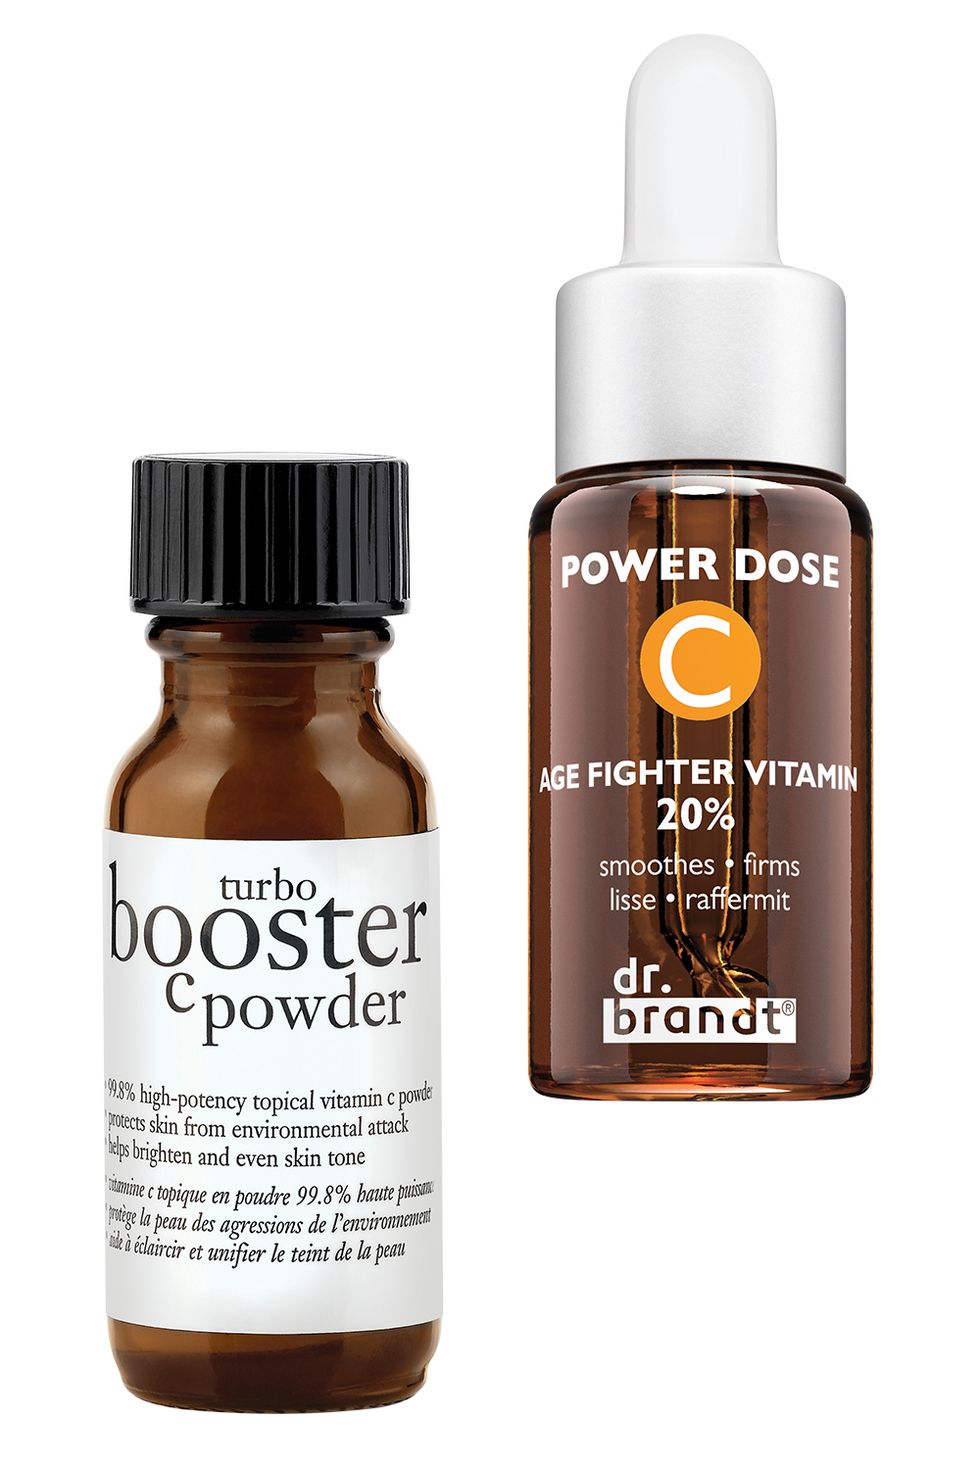 <p>Add a strong hit of vitamin C to your favorite cream or serum with concentrated boosters. "Vitamin C interferes with the pigment production that leads to brown spots," explains Palm.</p><p><strong>Philosophy </strong>Turbo Booster C Powder, $39, <a href="http://www.sephora.com/turbo-booster-c-powder-P204606" target="_blank">sephora.com</a>; <strong>Dr. Brandt</strong> Vitamin C Power Dose, $69, <a href="http://www.sephora.com/power-dose-vitamin-c-P407429?browserdefault=true&om_mmc=ppc-GG&mkwid=syIDCgk5V&pcrid=72604943437&pdv=c&site=us_search&country_switch=us&lang=en&gclid=CjwKEAjwlfO3BRDR4Pj_u-iO2U0SJAD88y1SBNOhPD_BjAEsxGr7hX6f8I19vycDaIA-skF-largsxoCbA_w_wcB" target="_blank">sephora.com</a>. </p>